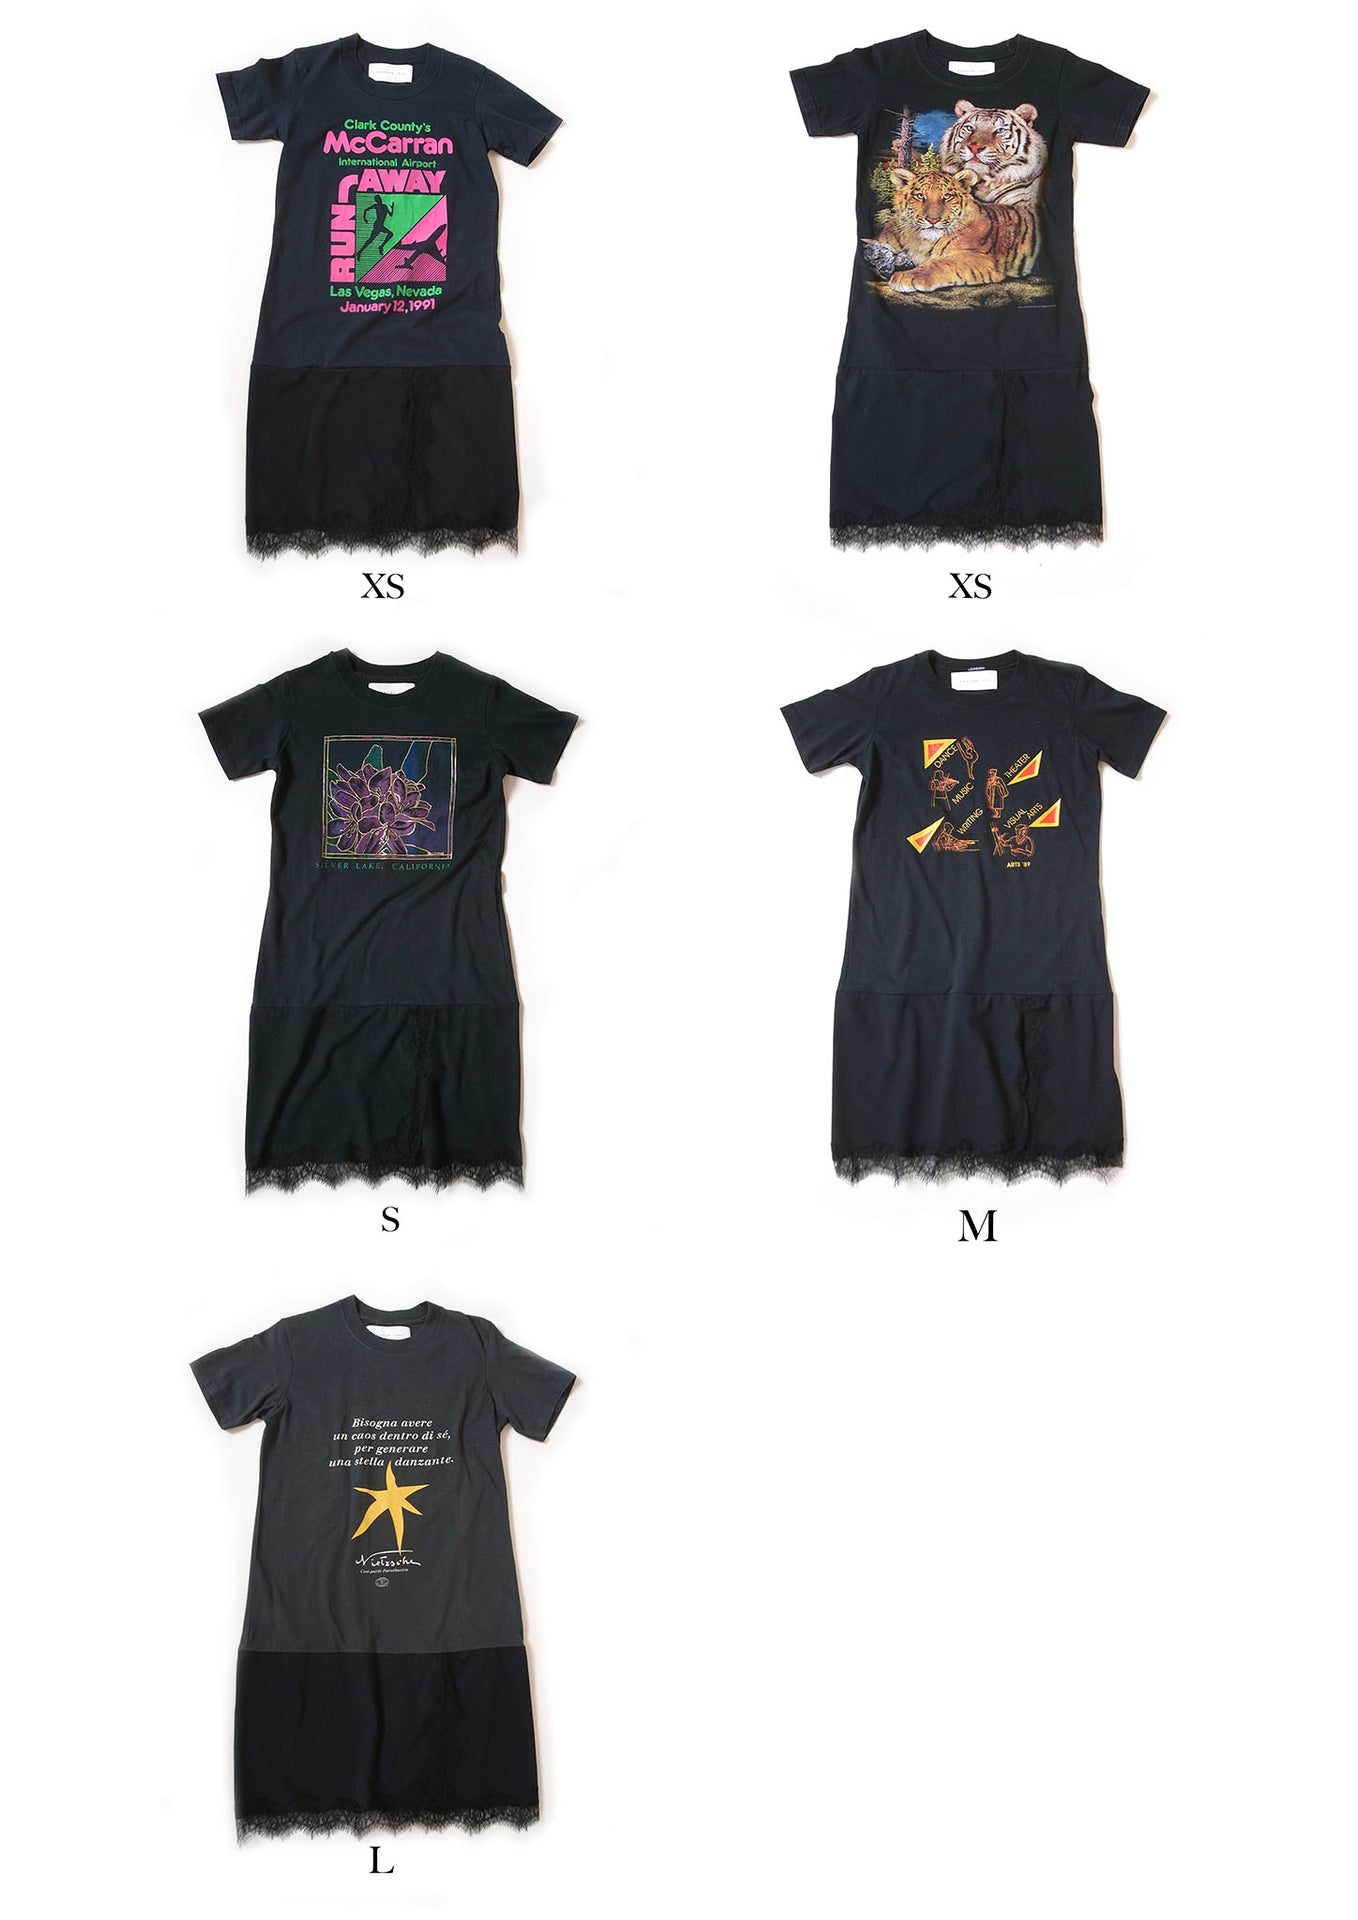 The Reconstituted Jersey Lace T-shirt Mini-dress